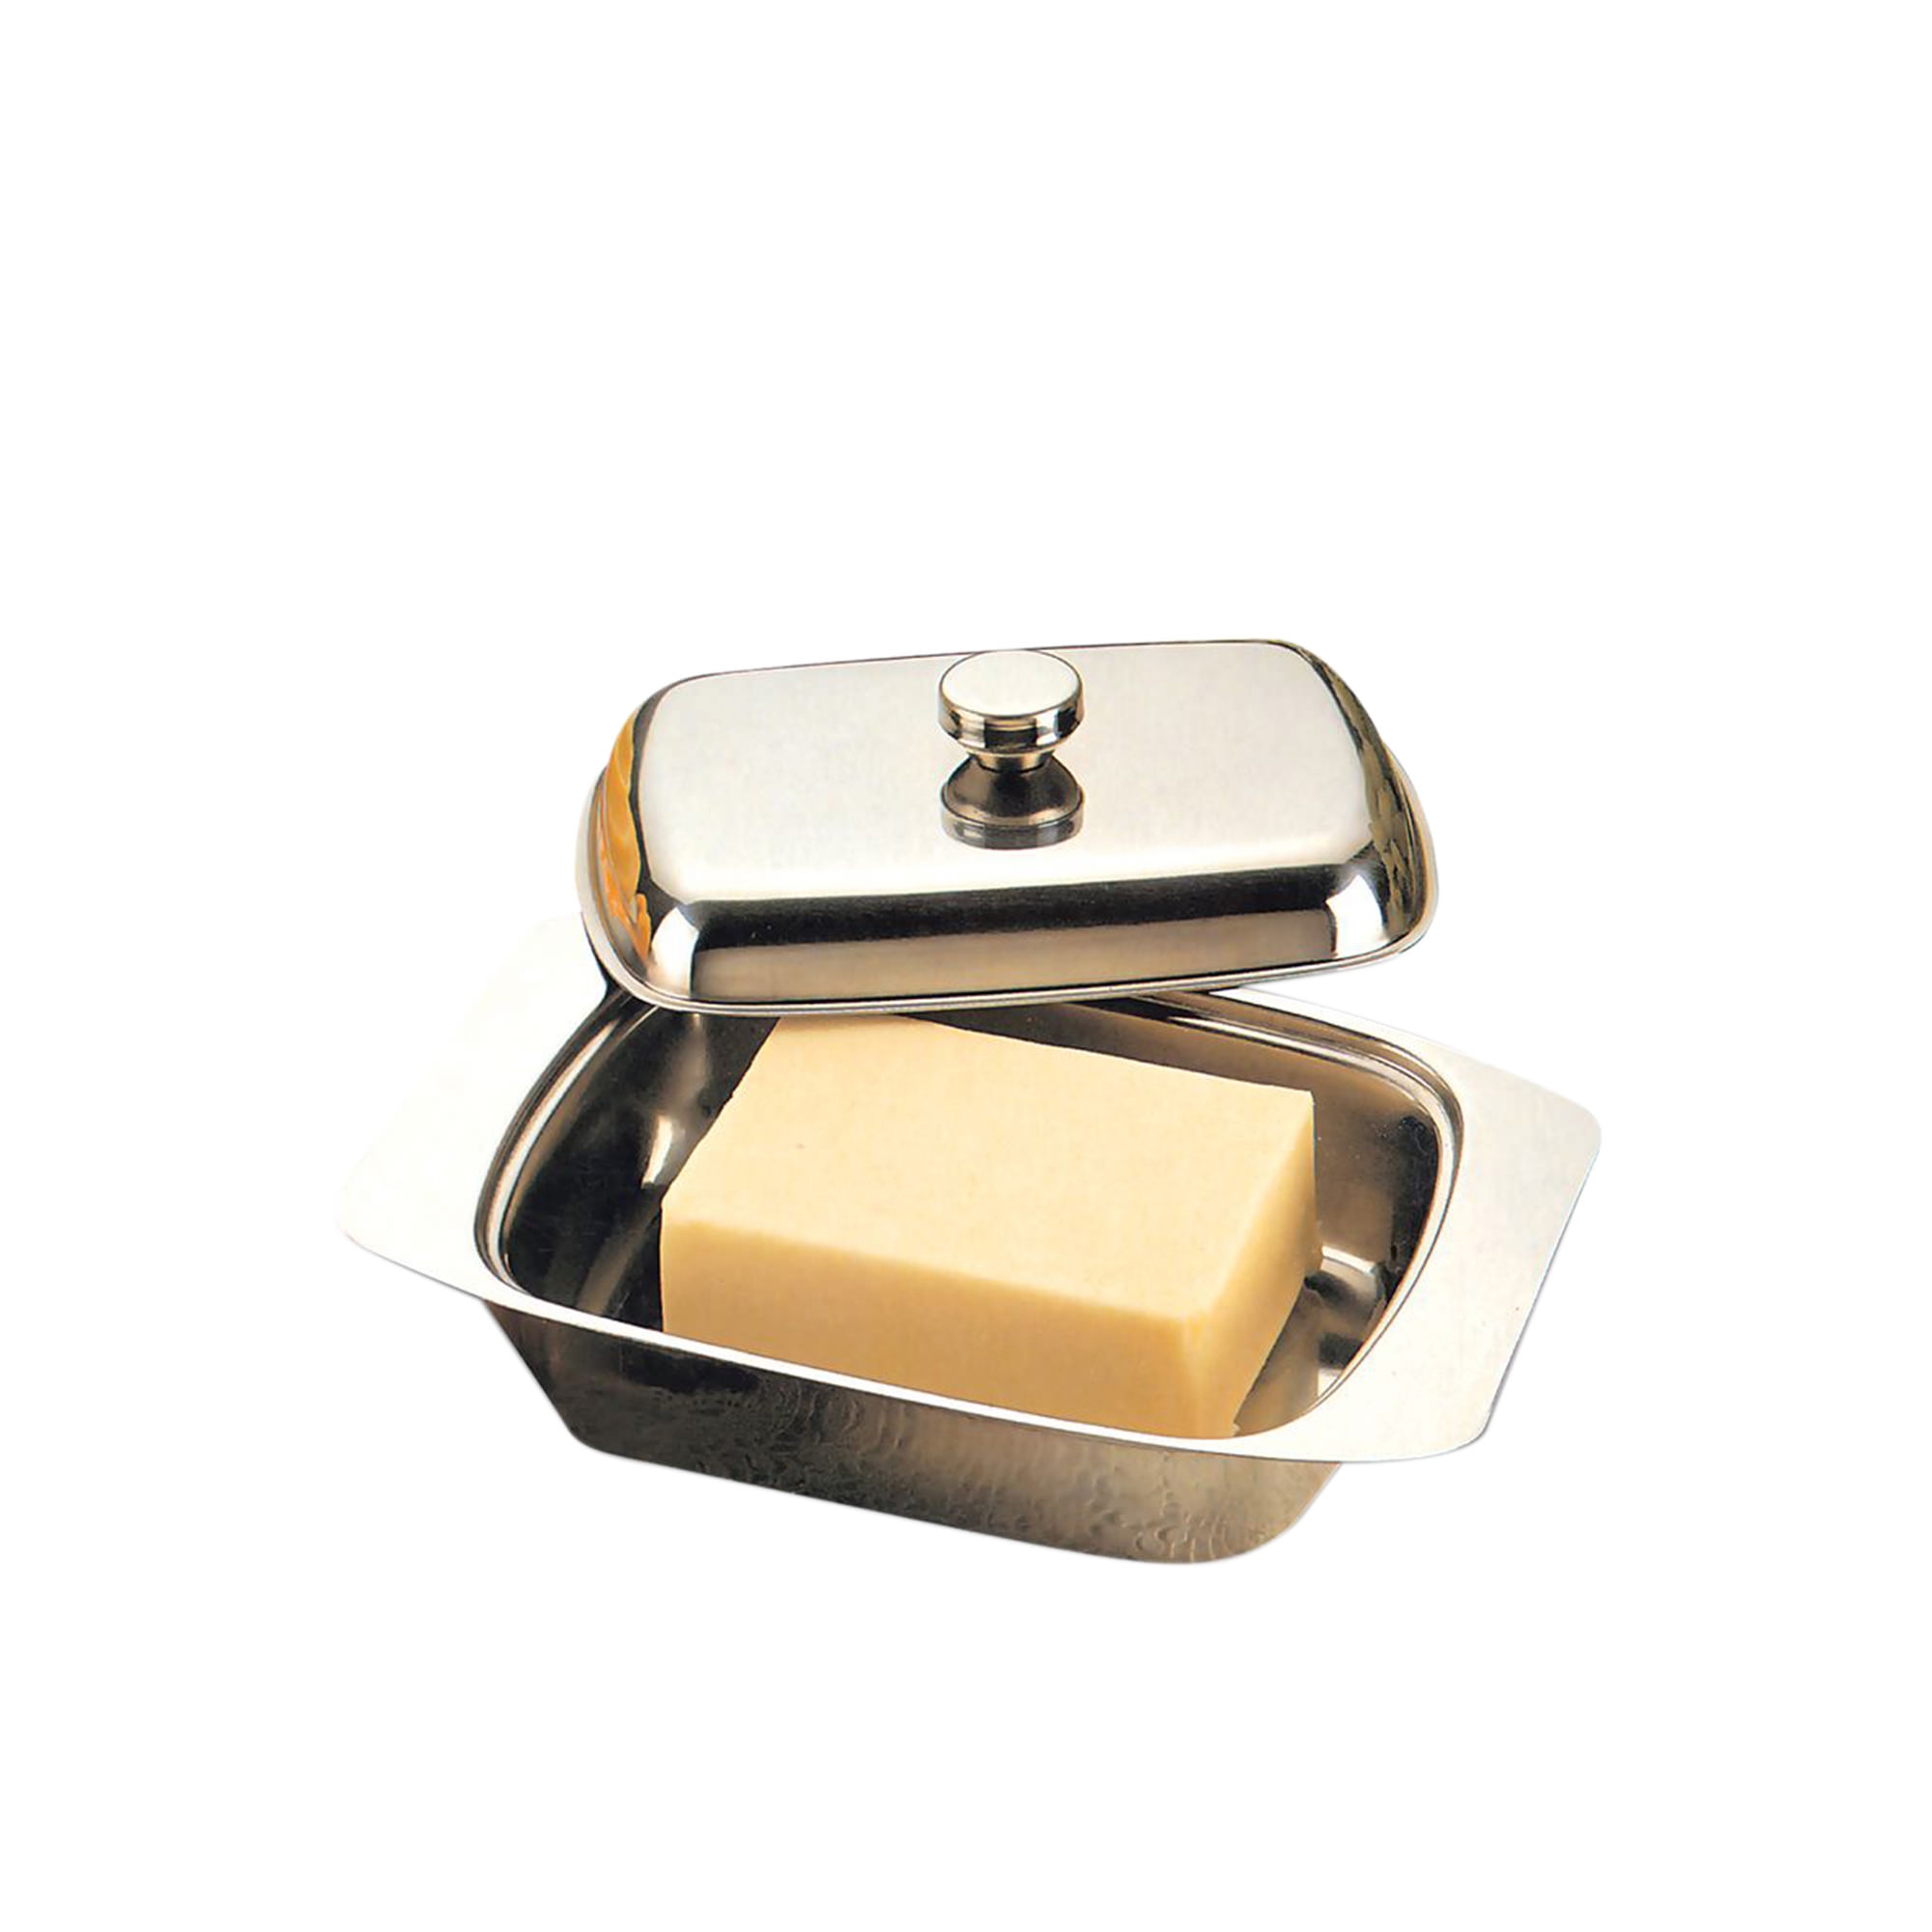 Appetito Stainless Steel Butter Dish with Cover Image 1